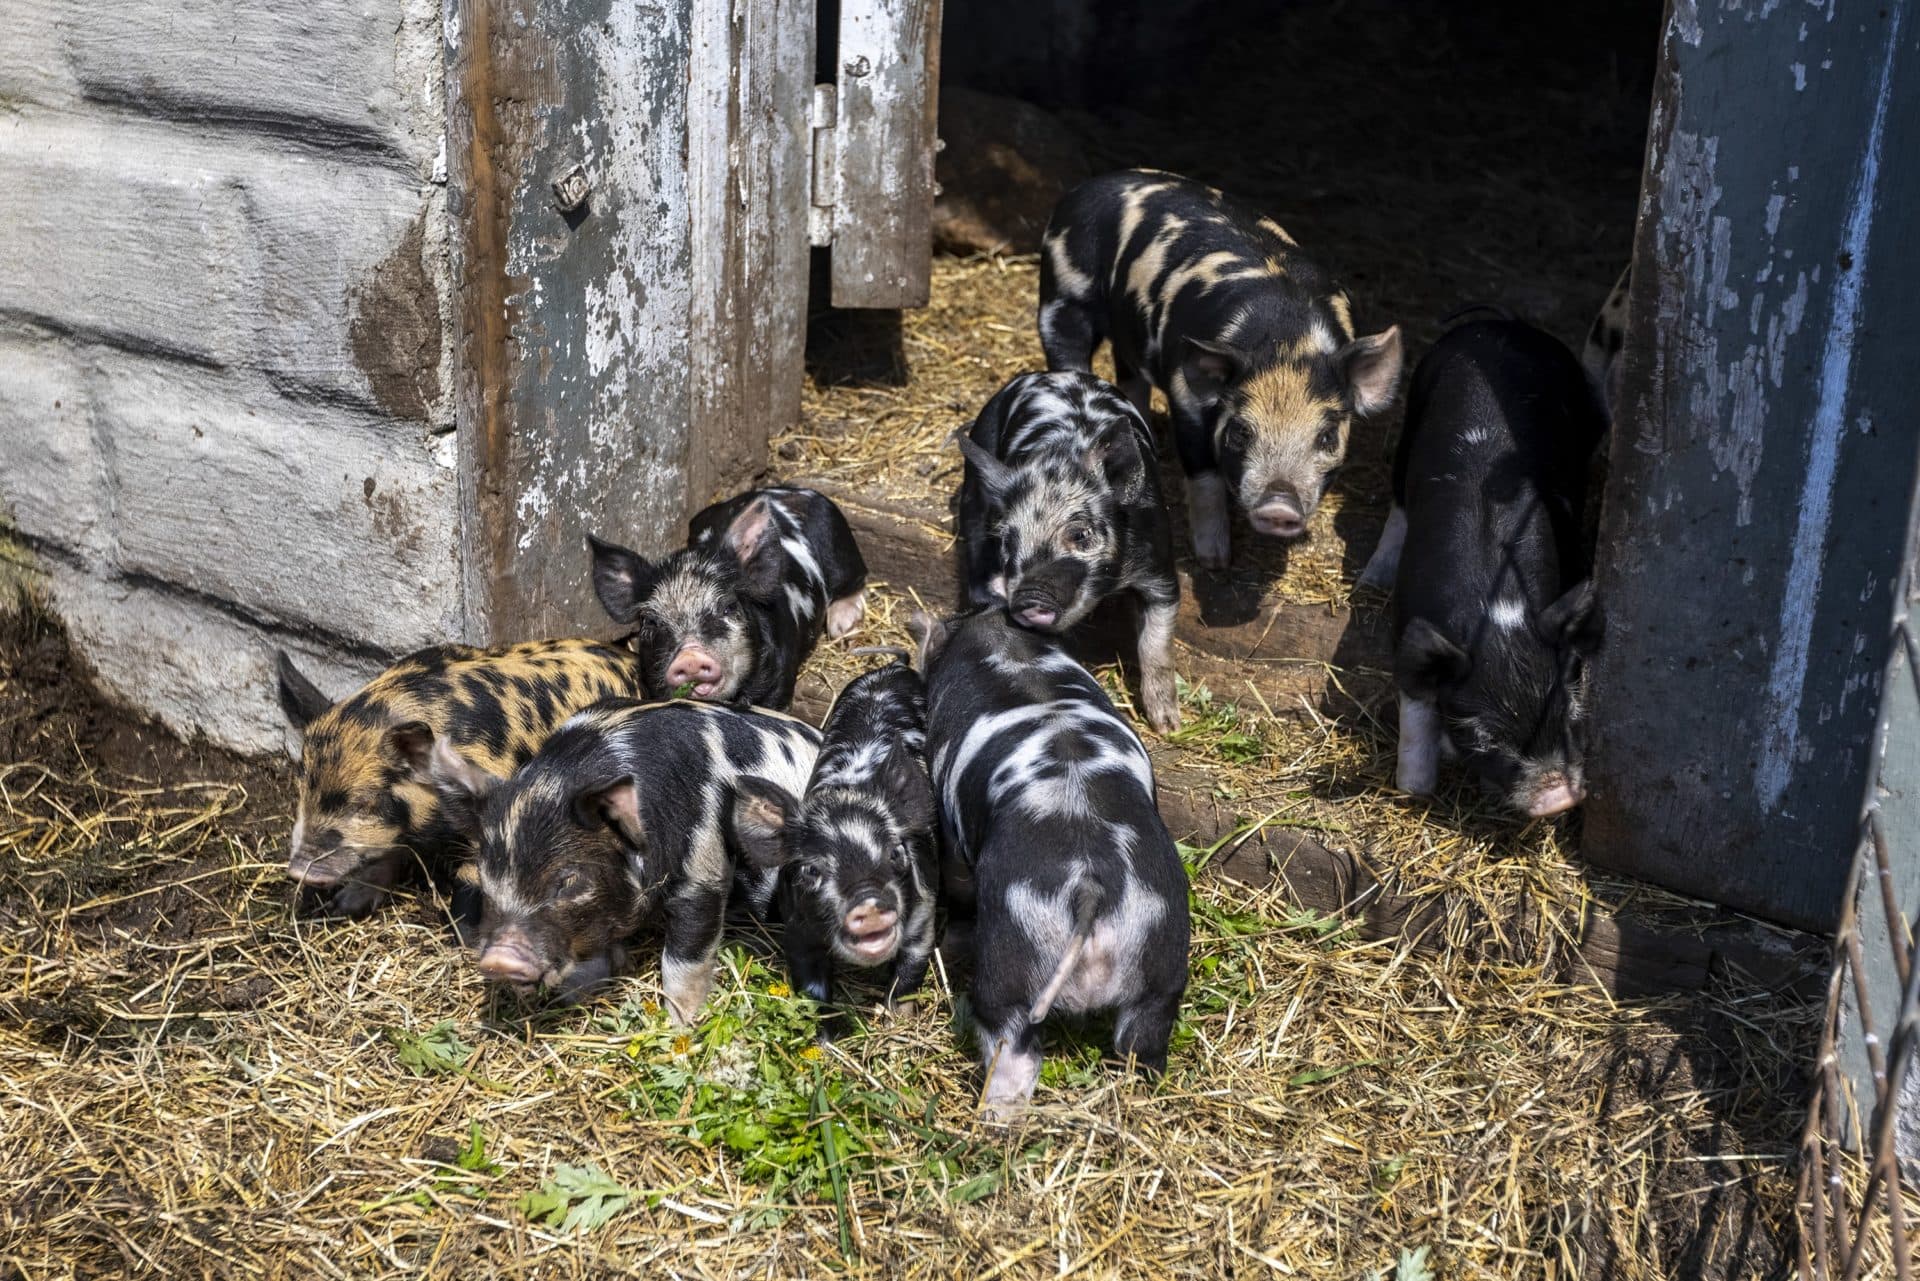 Baby pigs at Round the Bend Farm. (Jesse Costa/WBUR)